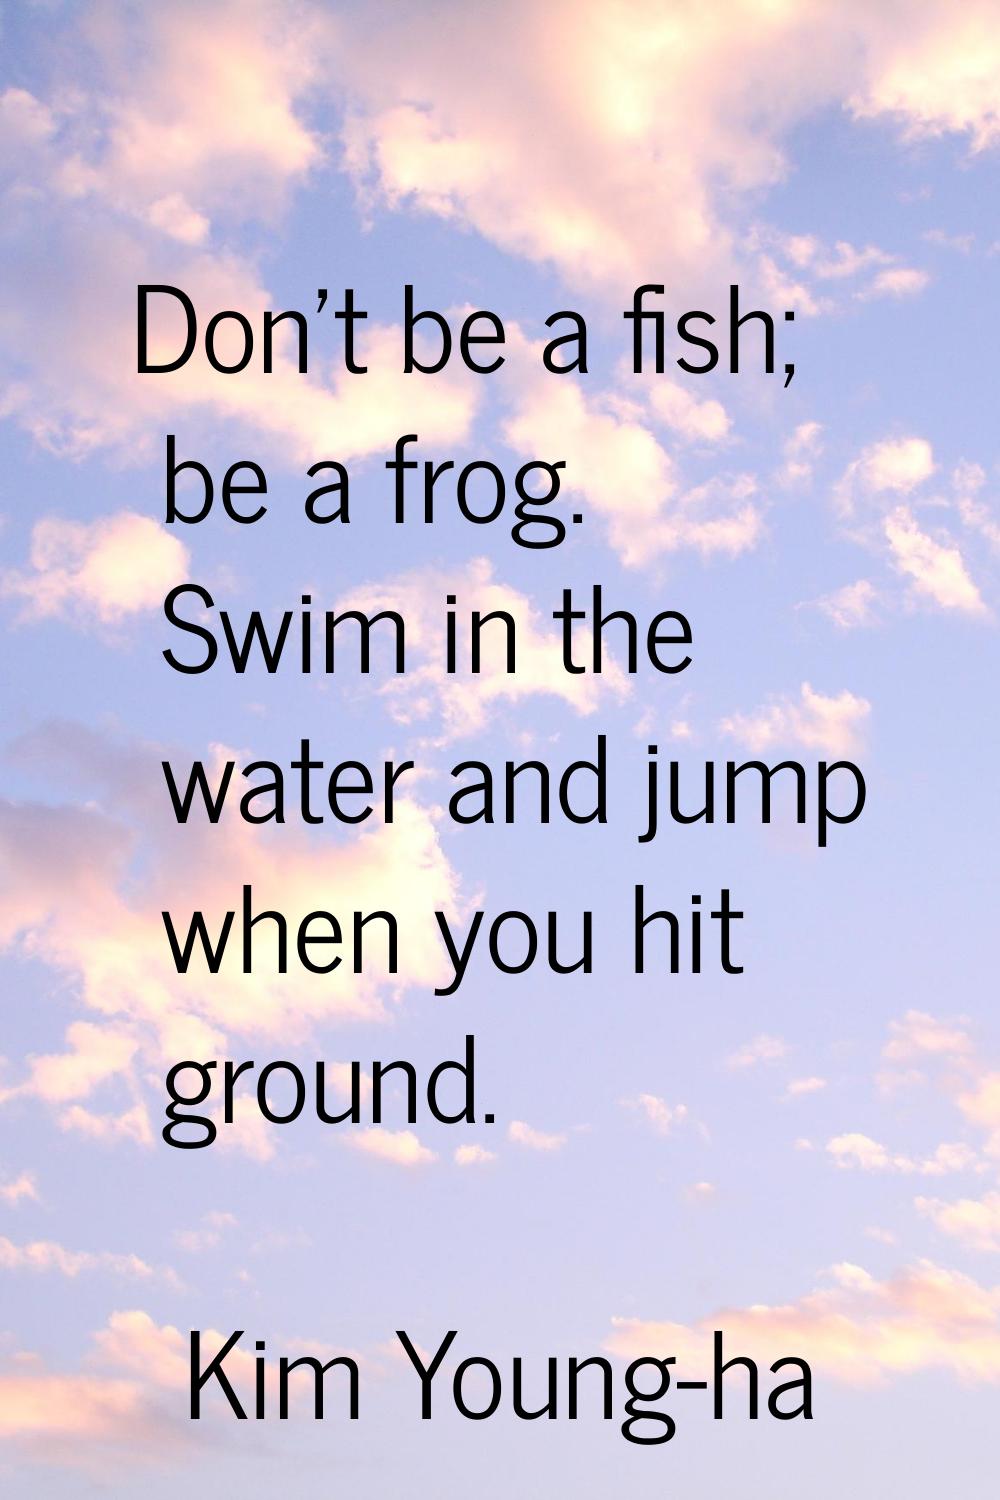 Don't be a fish; be a frog. Swim in the water and jump when you hit ground.